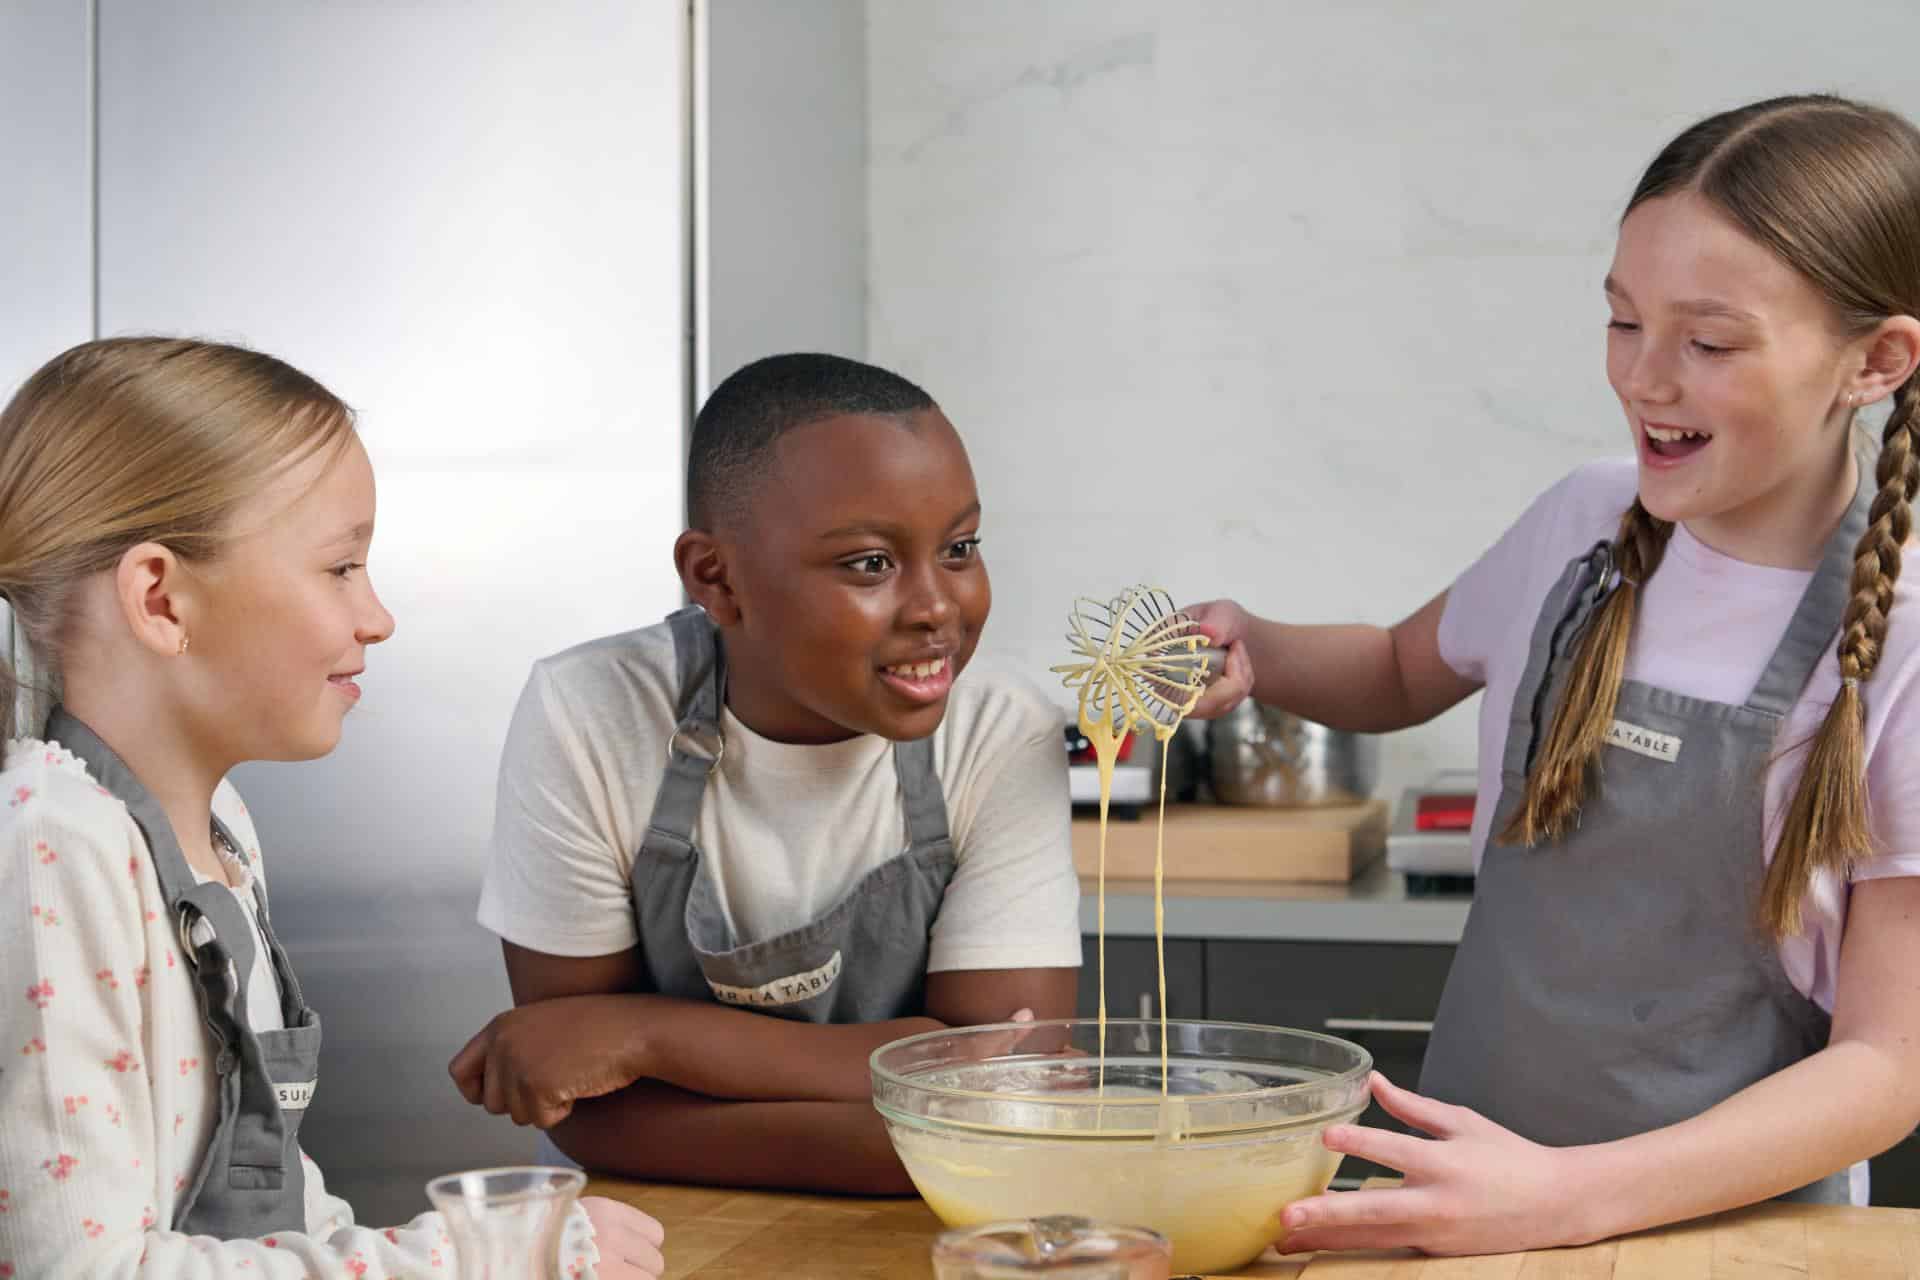 kids cooking classes, cooking classes for kids, teen cooking classes, summer activities for kids teens